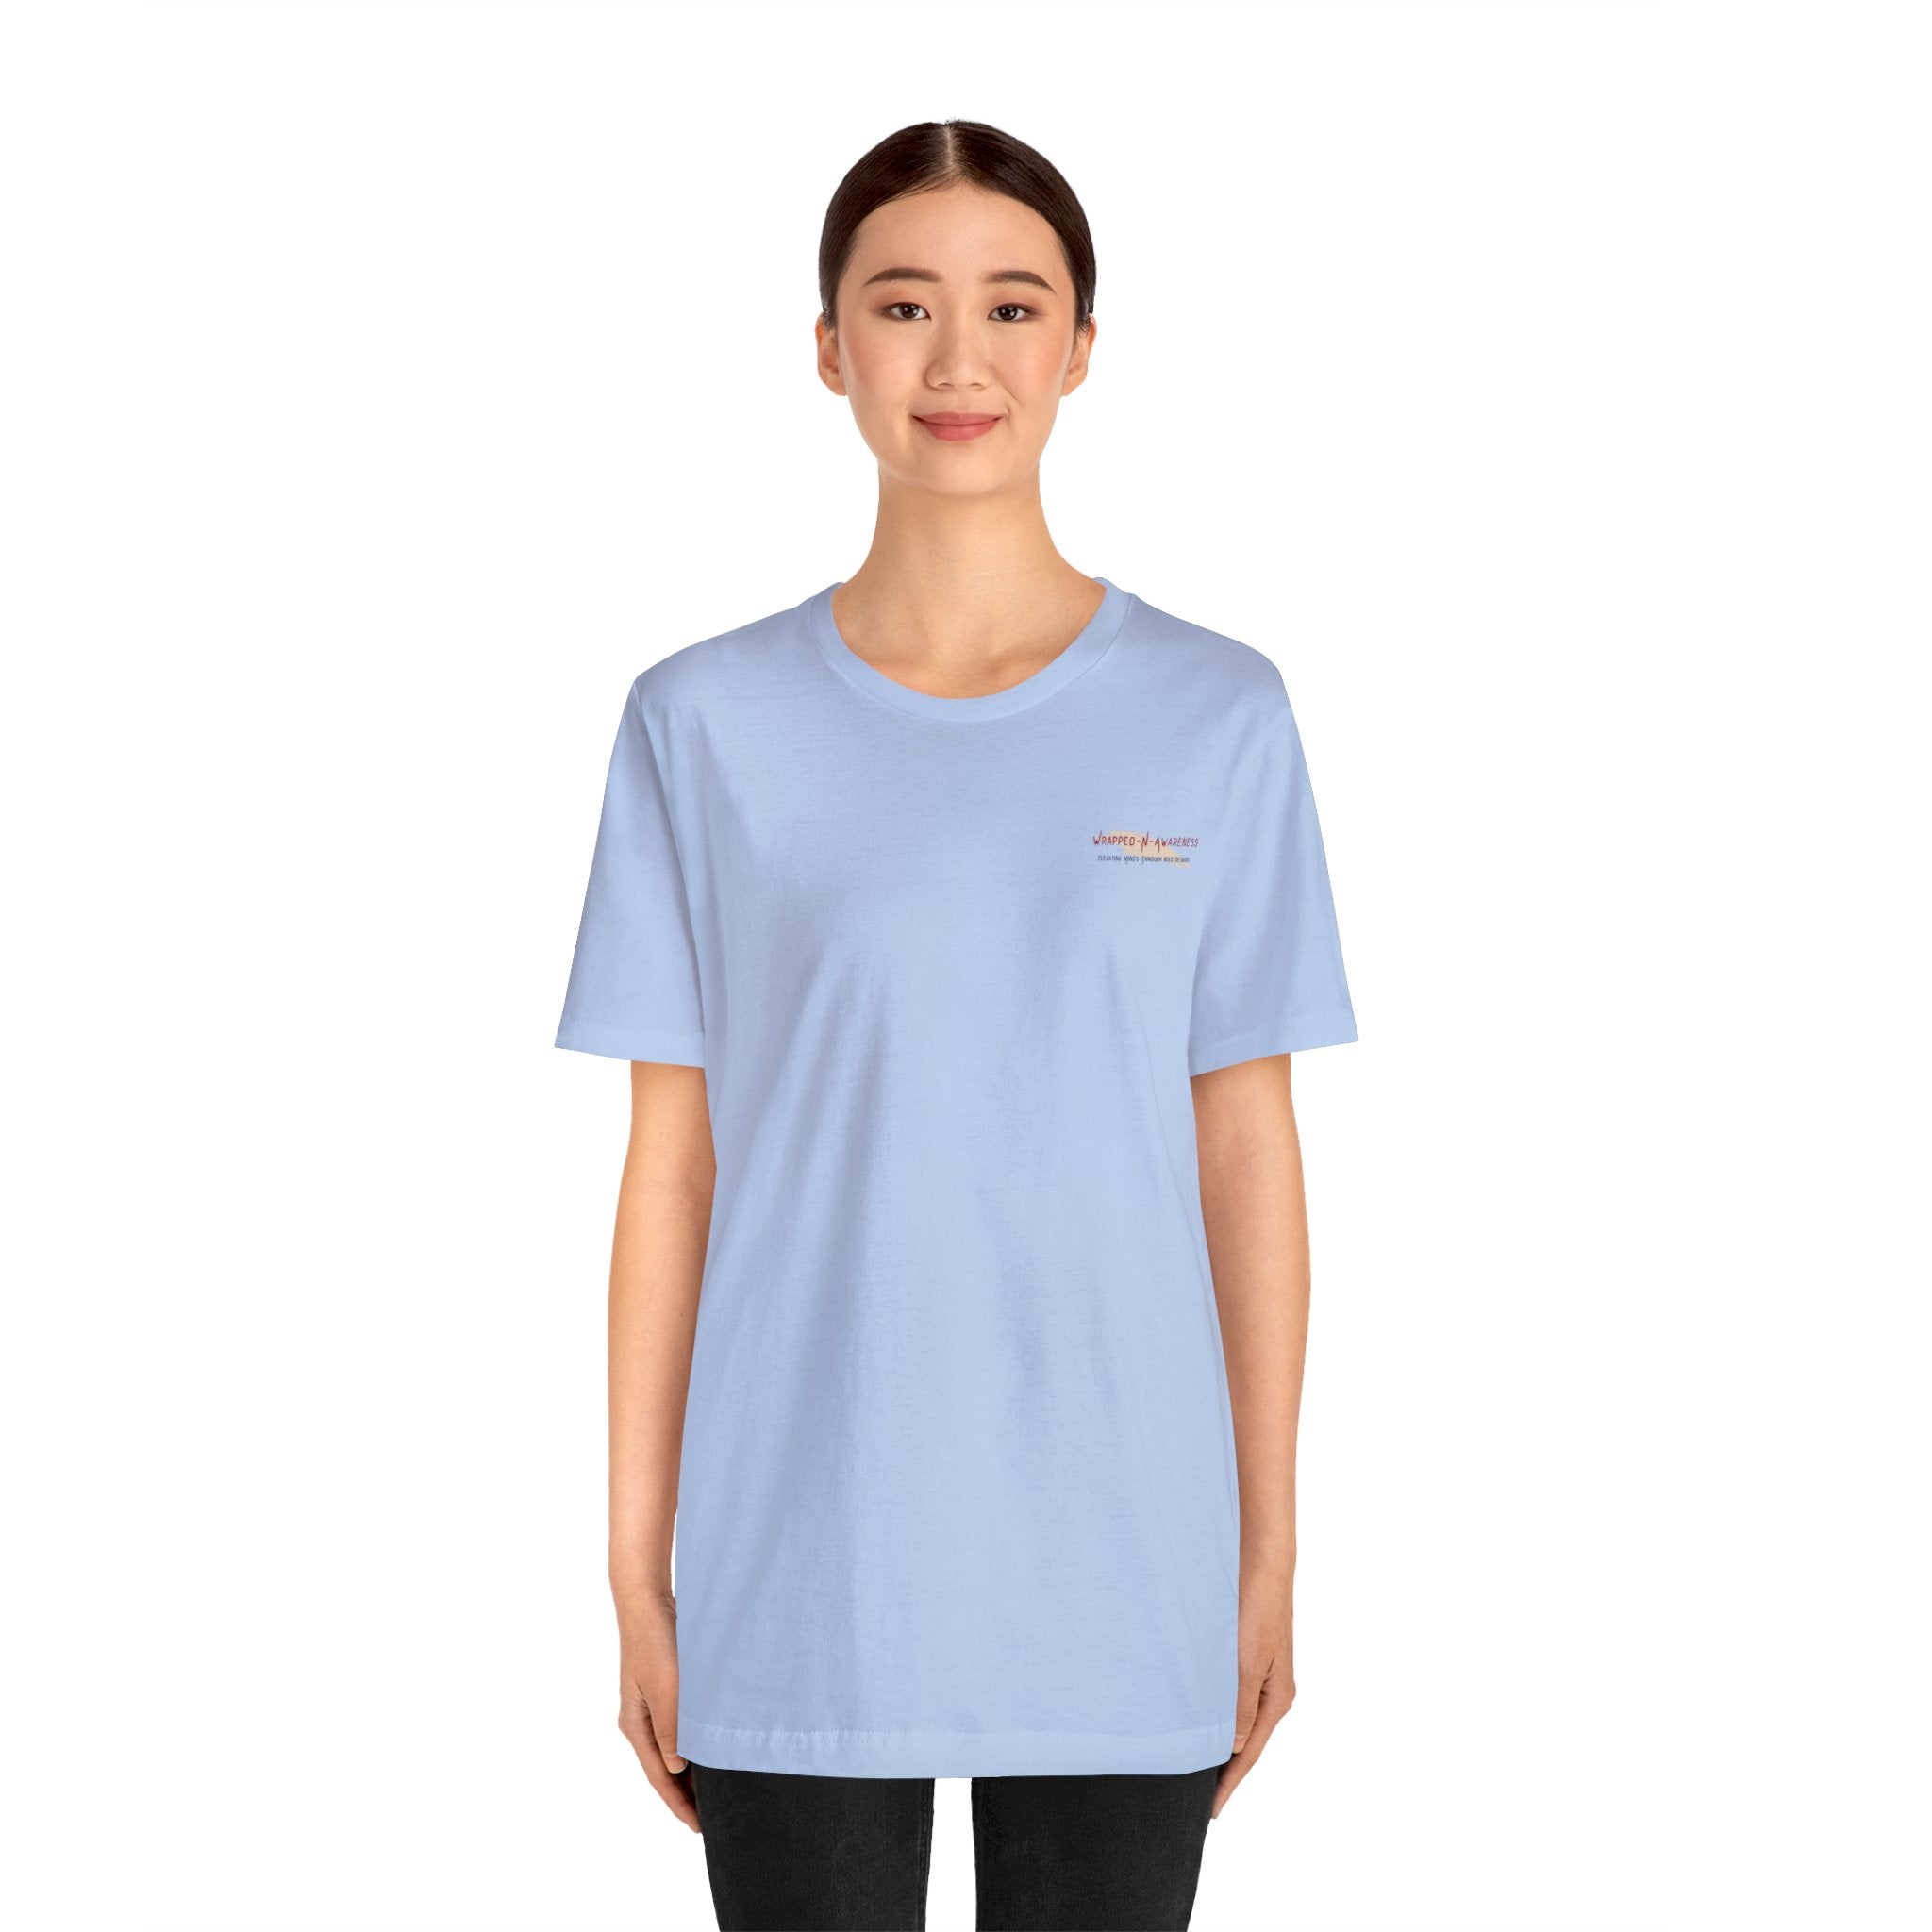 Release Your Mind Jersey Tee - Bella+Canvas 3001 Heather Mauve Airlume Cotton Bella+Canvas 3001 Crew Neckline Jersey Short Sleeve Lightweight Fabric Mental Health Support Retail Fit Tear-away Label Tee Unisex Tee T-Shirt 14256138839517583574_2048 Printify